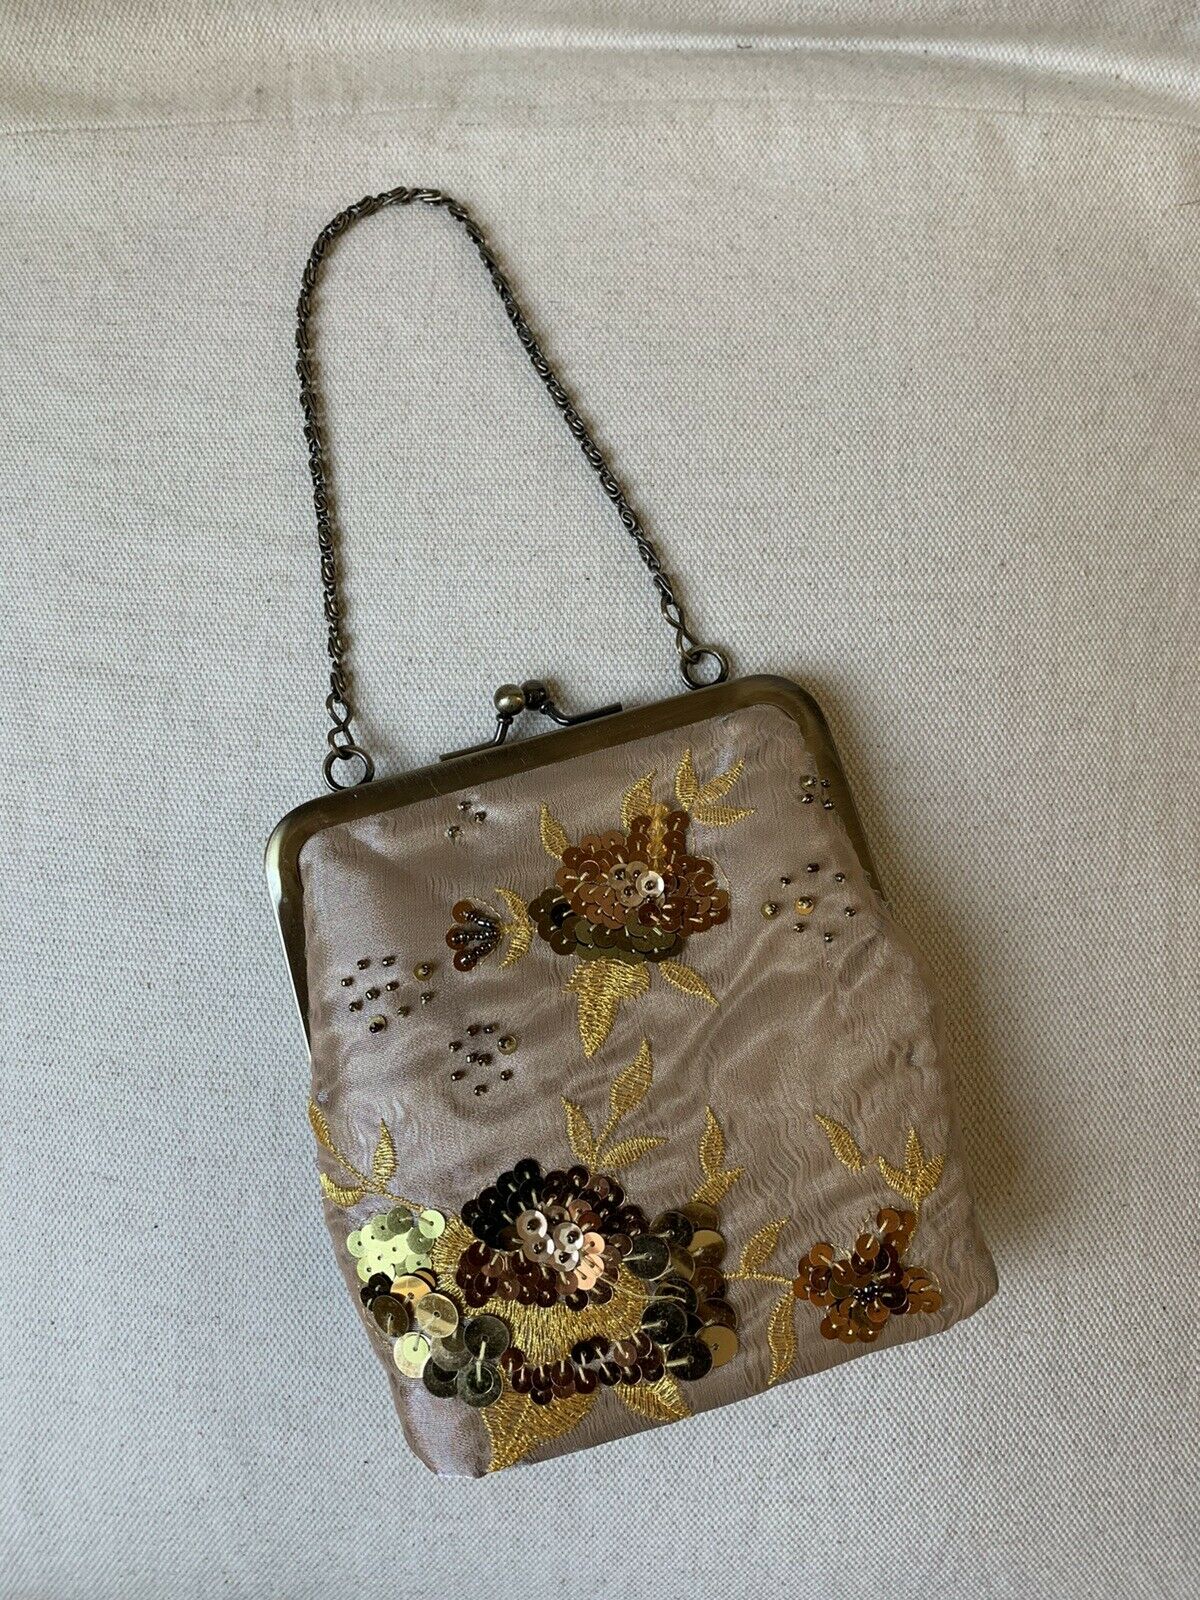 Small Evening Purse Bag Iridescent Fabric With  Gold Sequins,beads, Stitching